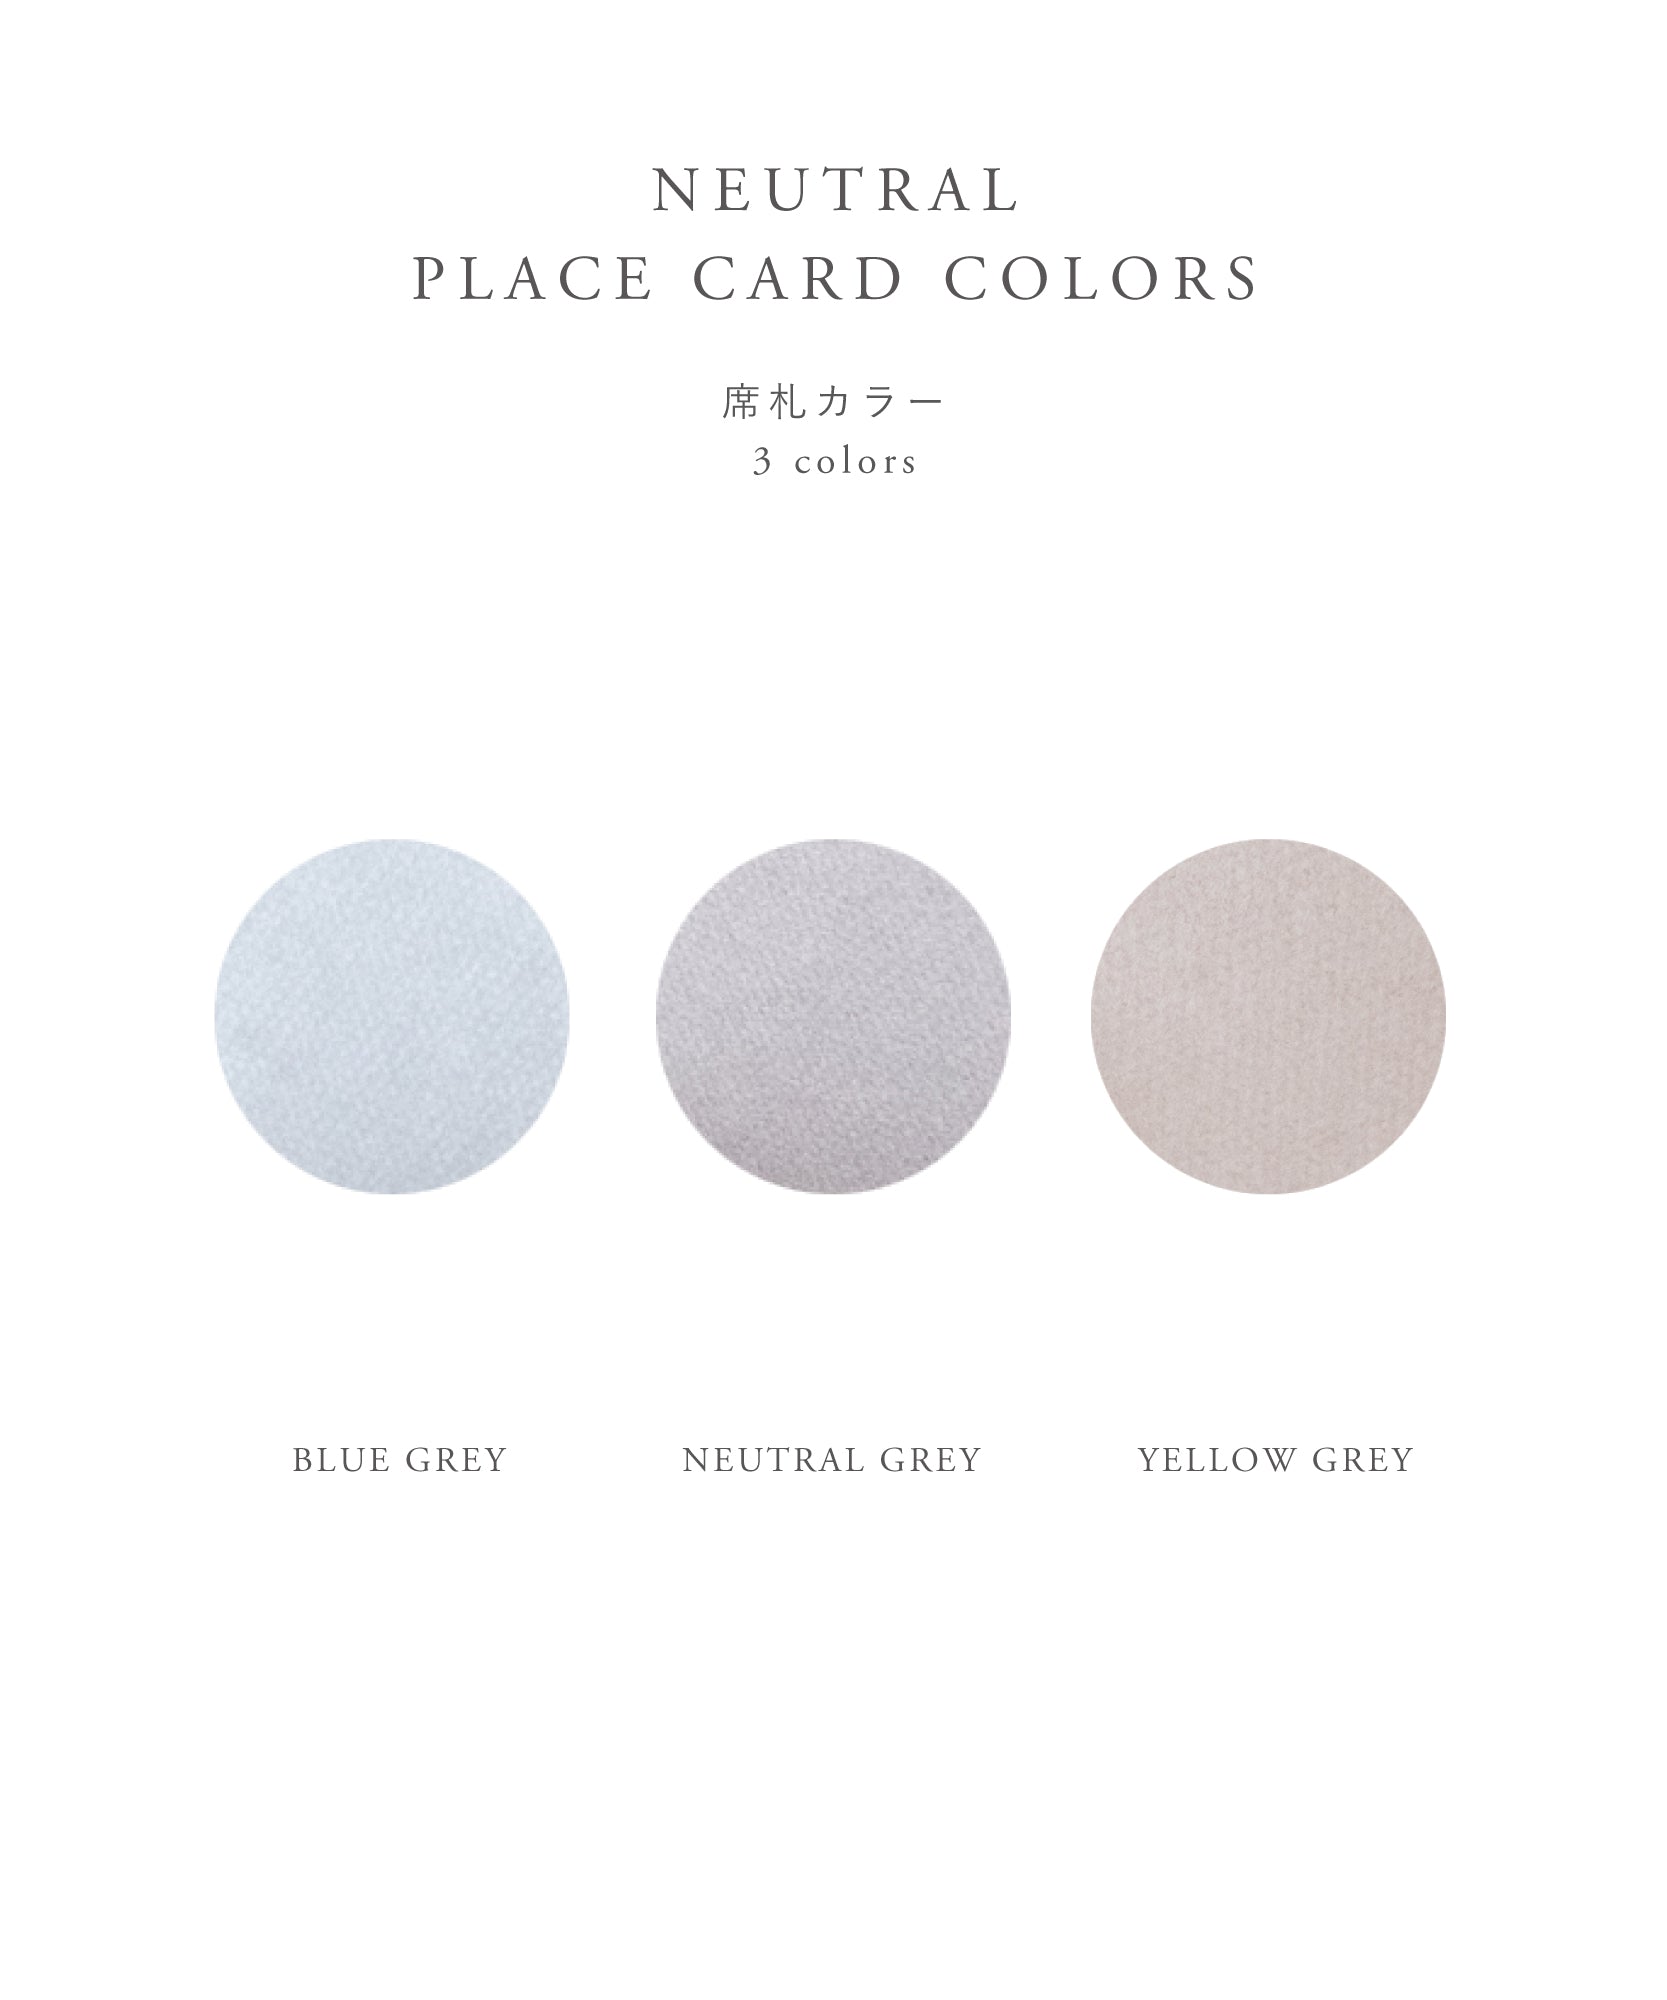 Neutral Color Place Cards / ニュアンスカラーの席札